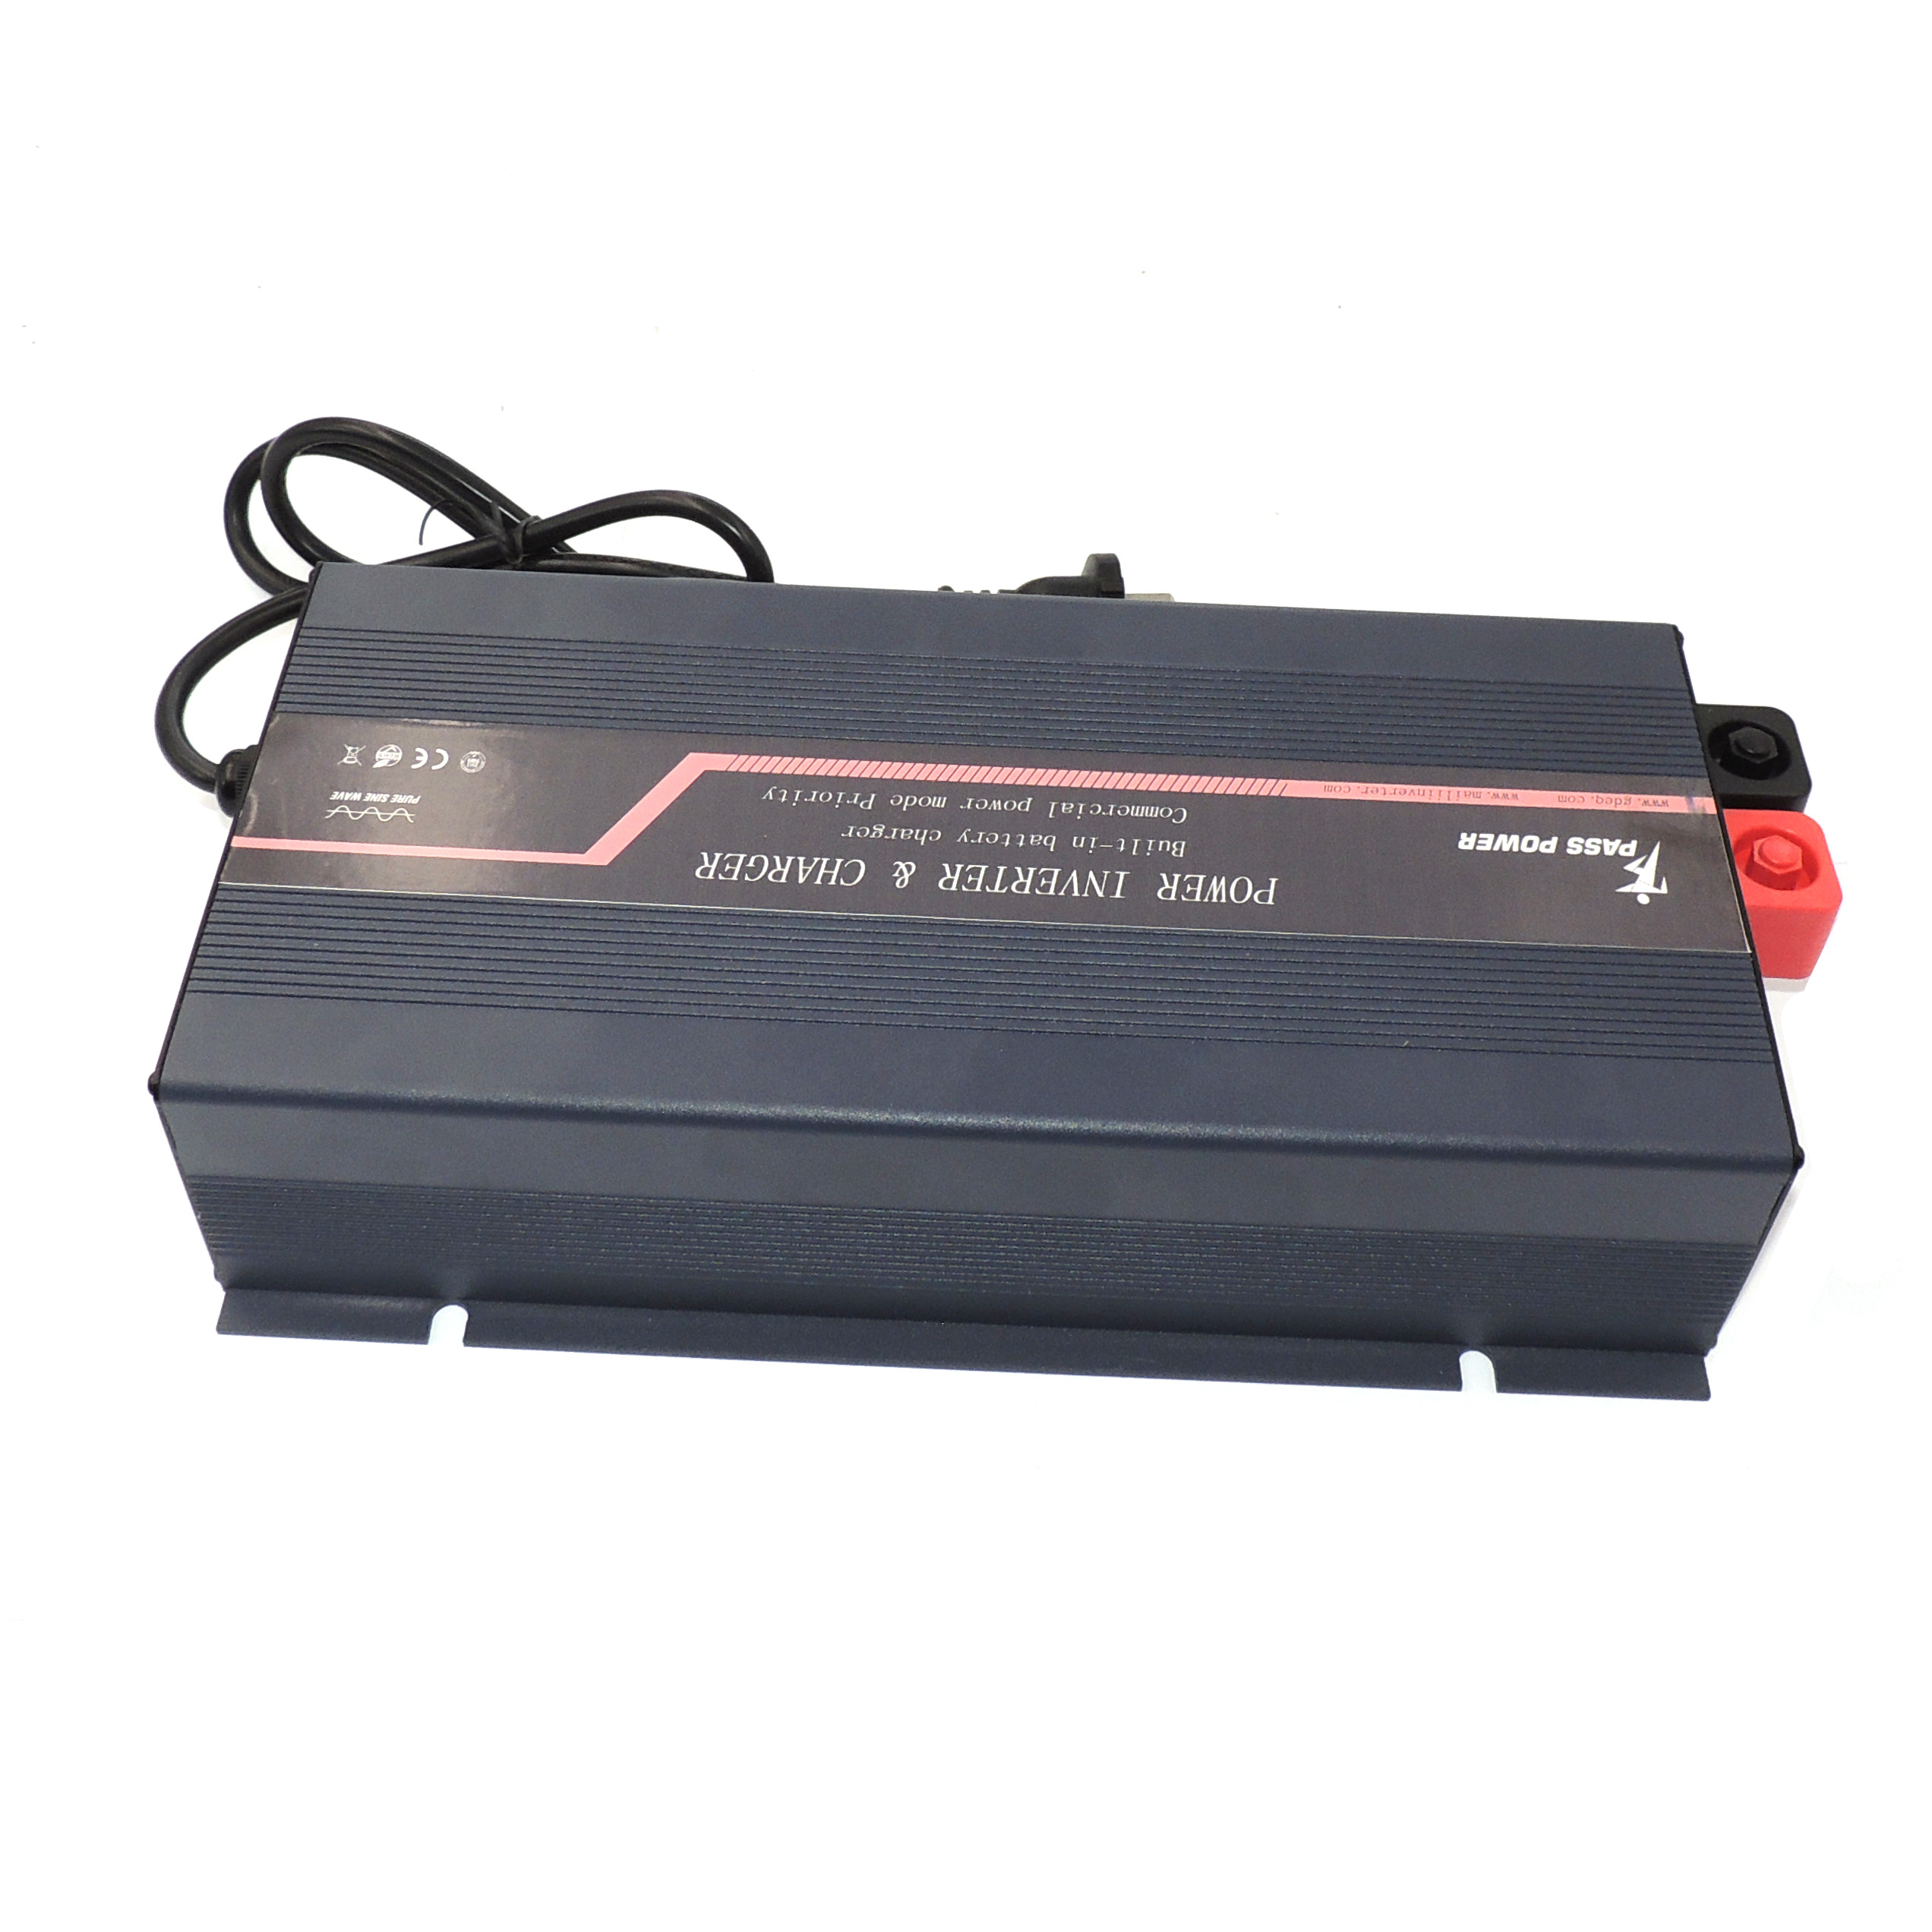 1000w Off Grid High Frequency Pure Sine Wave Inverter With 10A Battery Charger and UPS Built in for home application